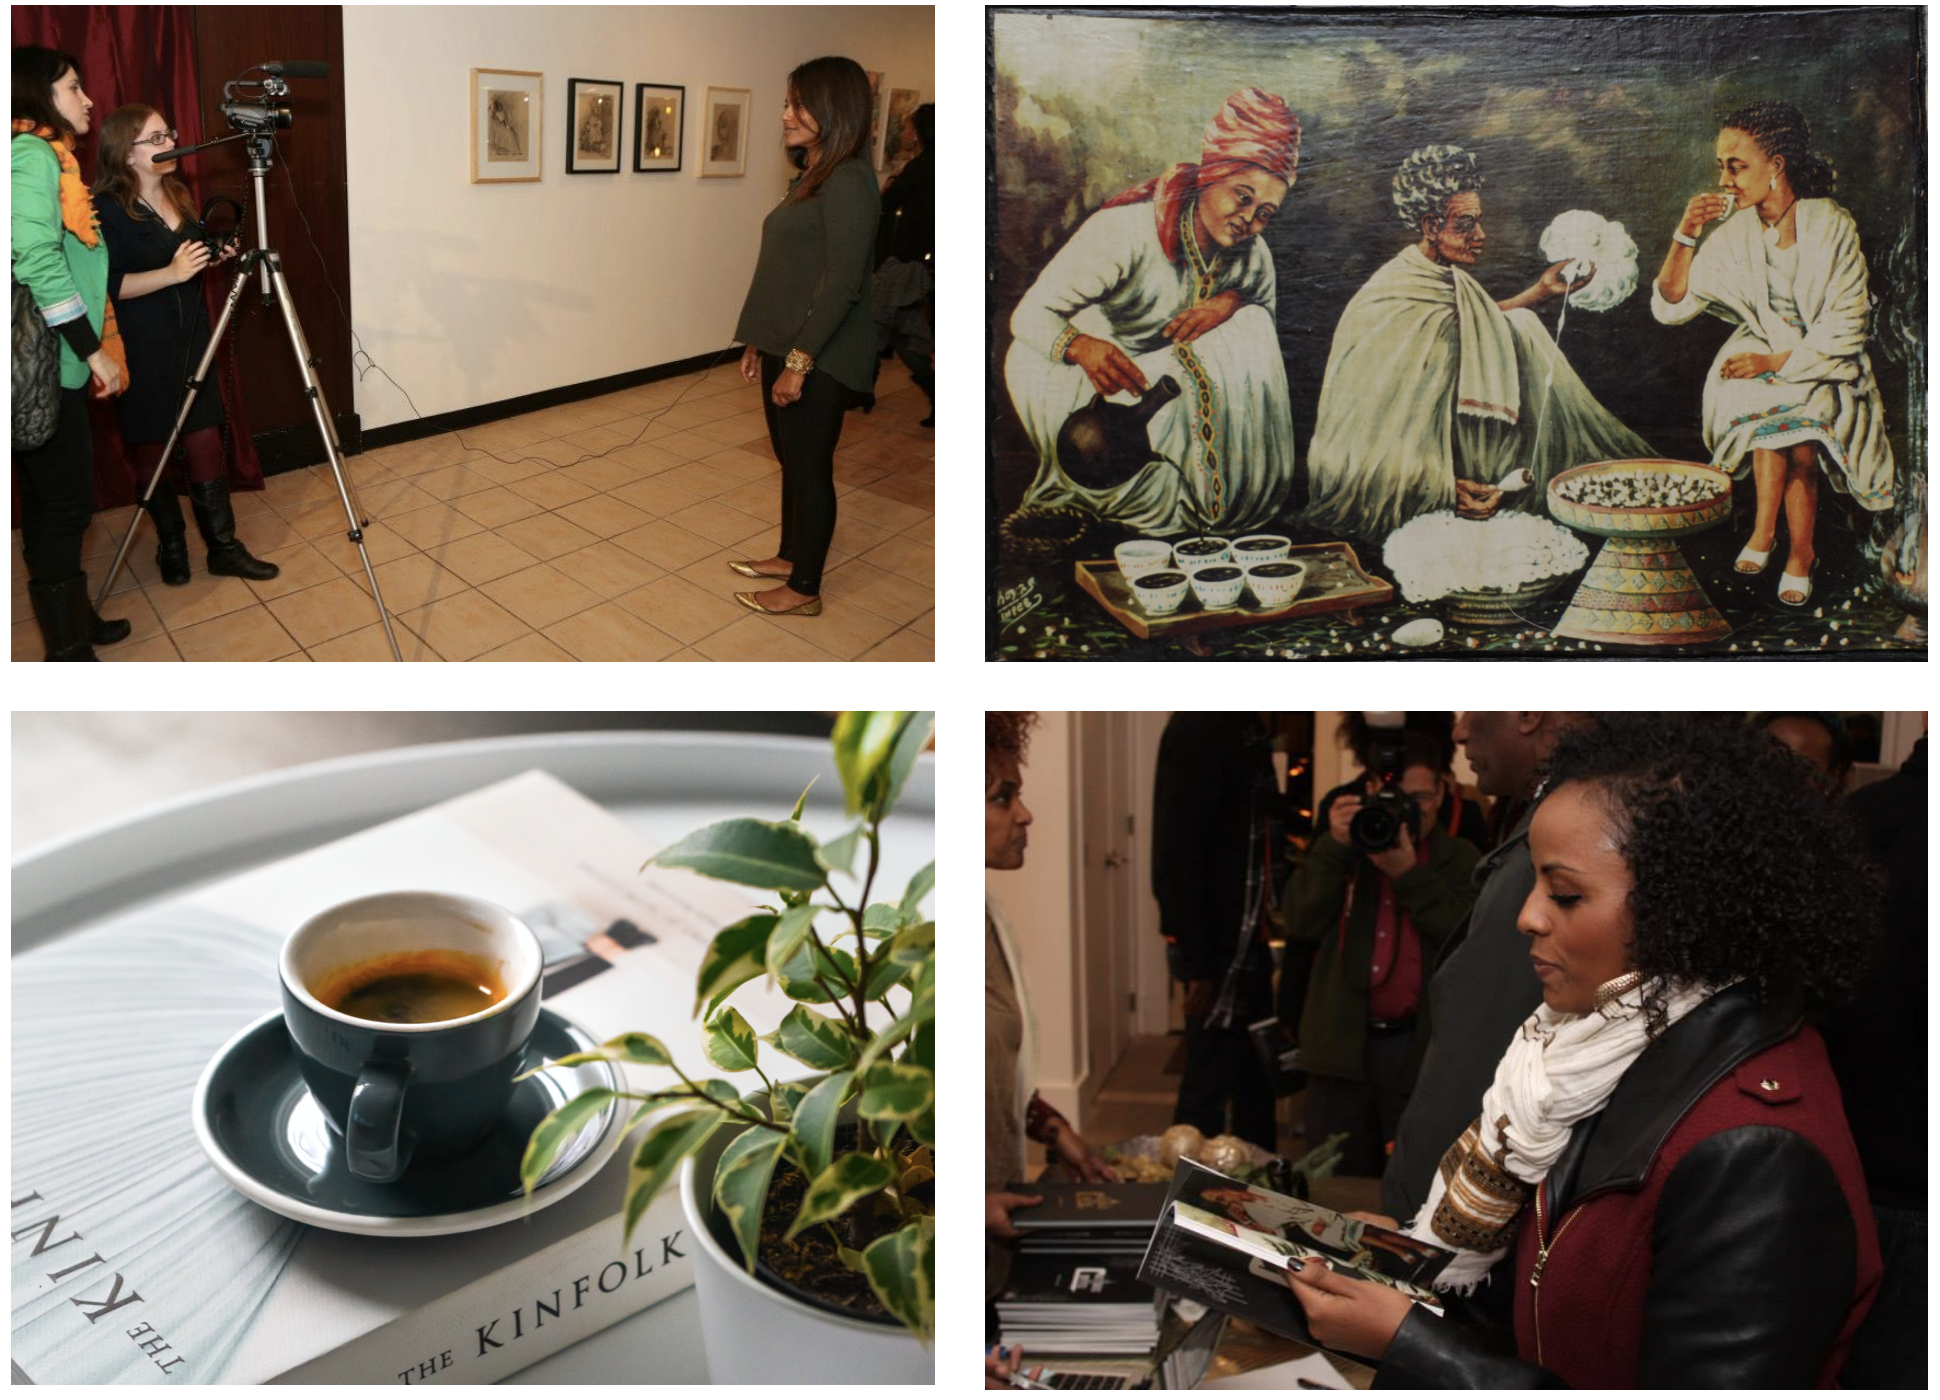 Clockwise from the left: Kaffa Club event 2013; Lemma Guya, 1972; A Culture of Coffee Book Launch, 2013; 